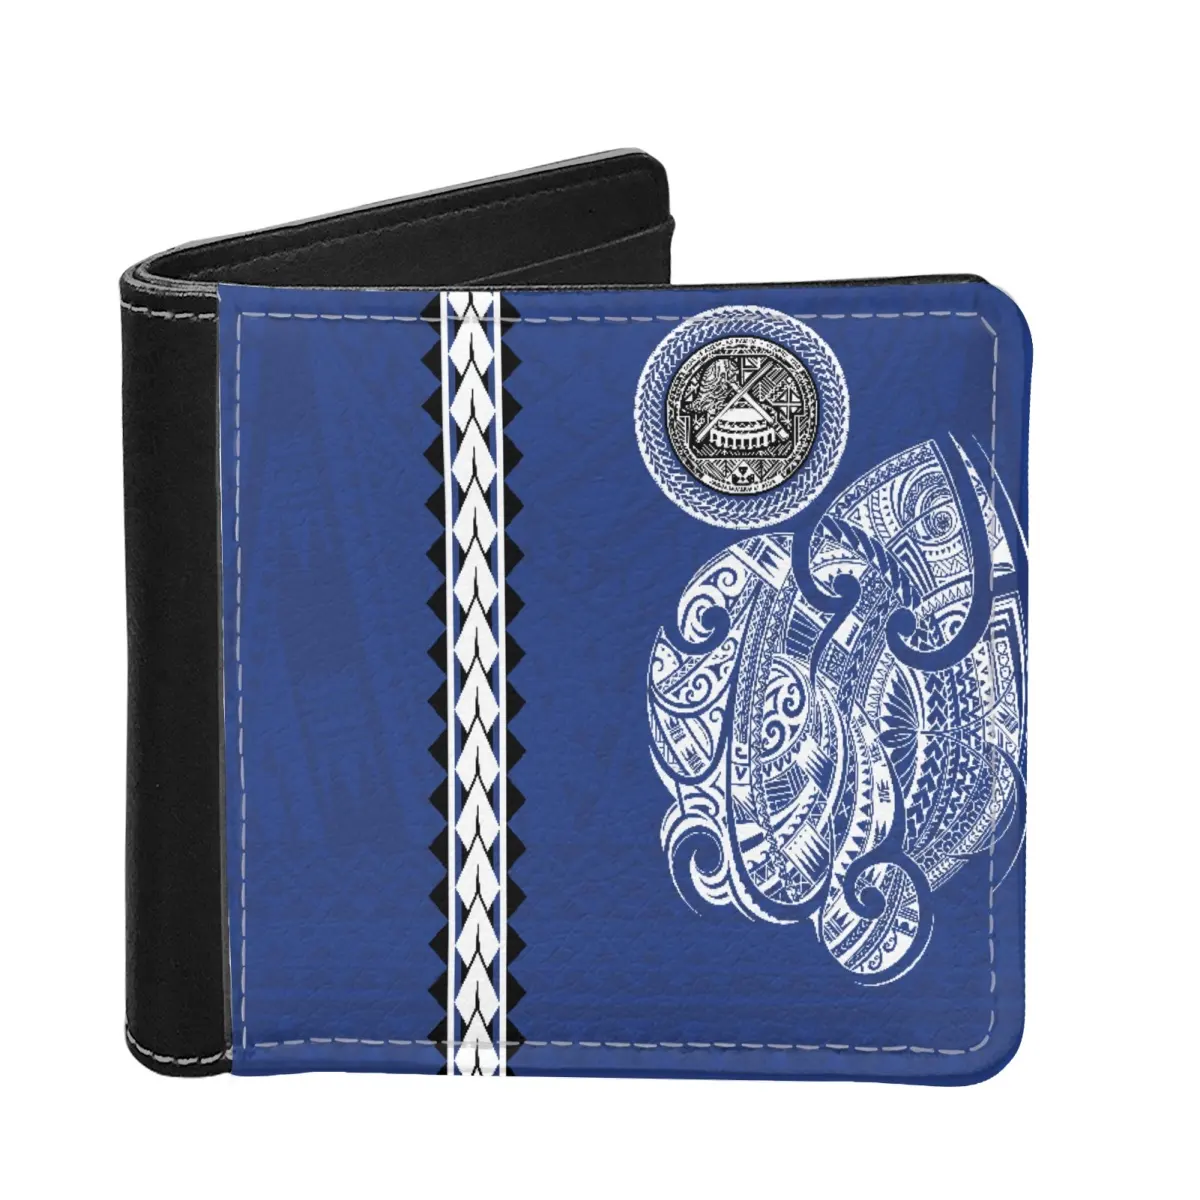 Leather Card Holder Wallet Leather Men Wholesale American Samoa Eagle With Polynesian Patterns Mens Wallets Leather Small